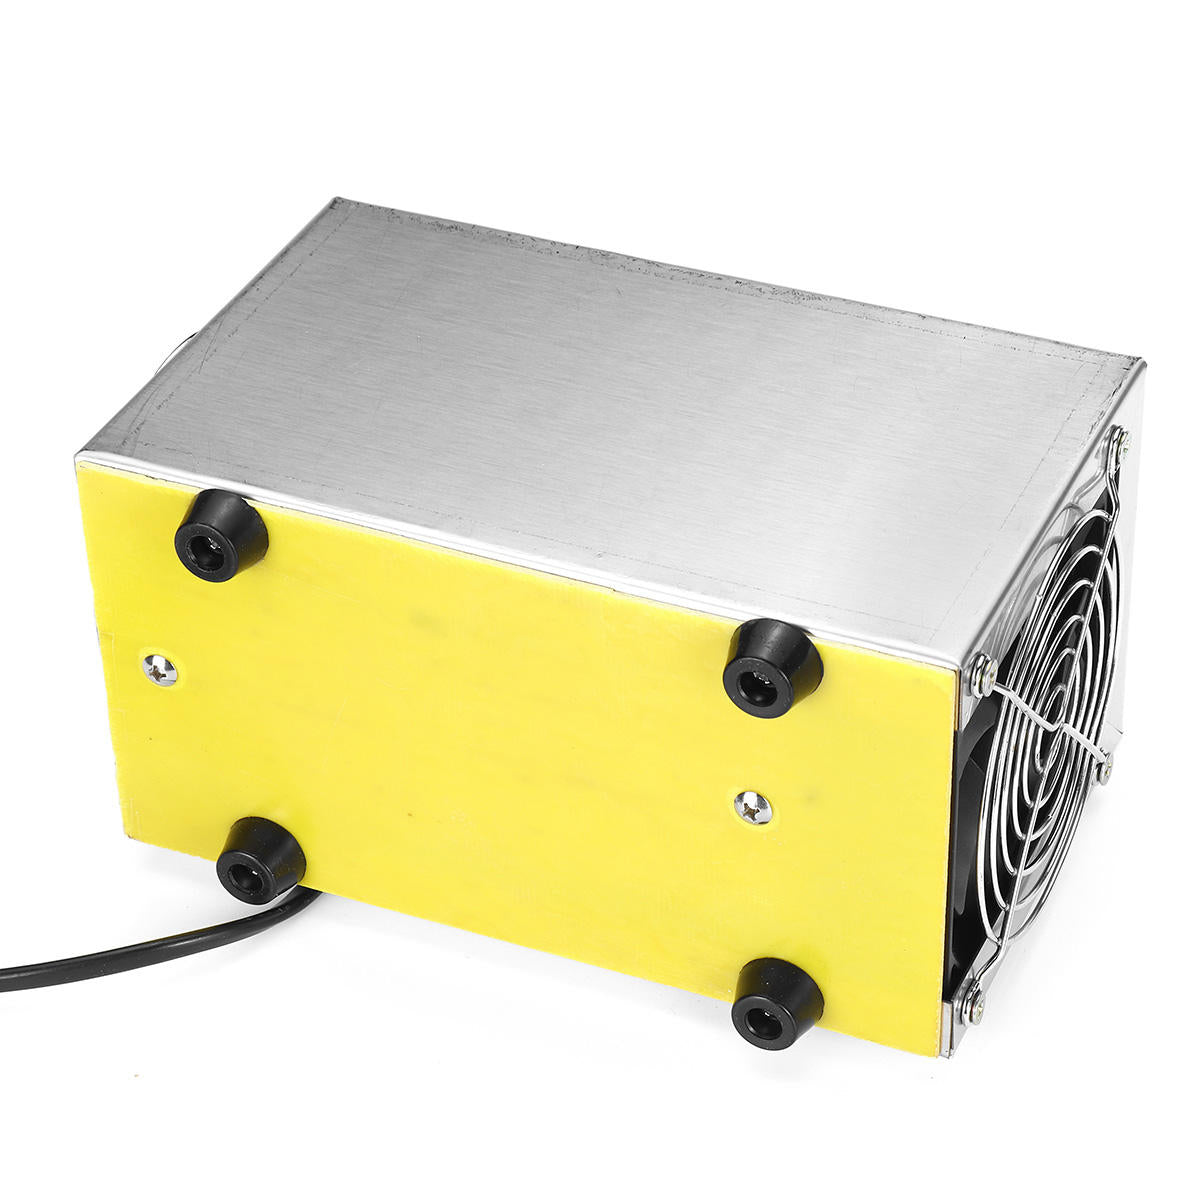 24g Ozone Generator Module Ozone Machine Air Purifier Air Cleaner Disinfection Cleaner 220V